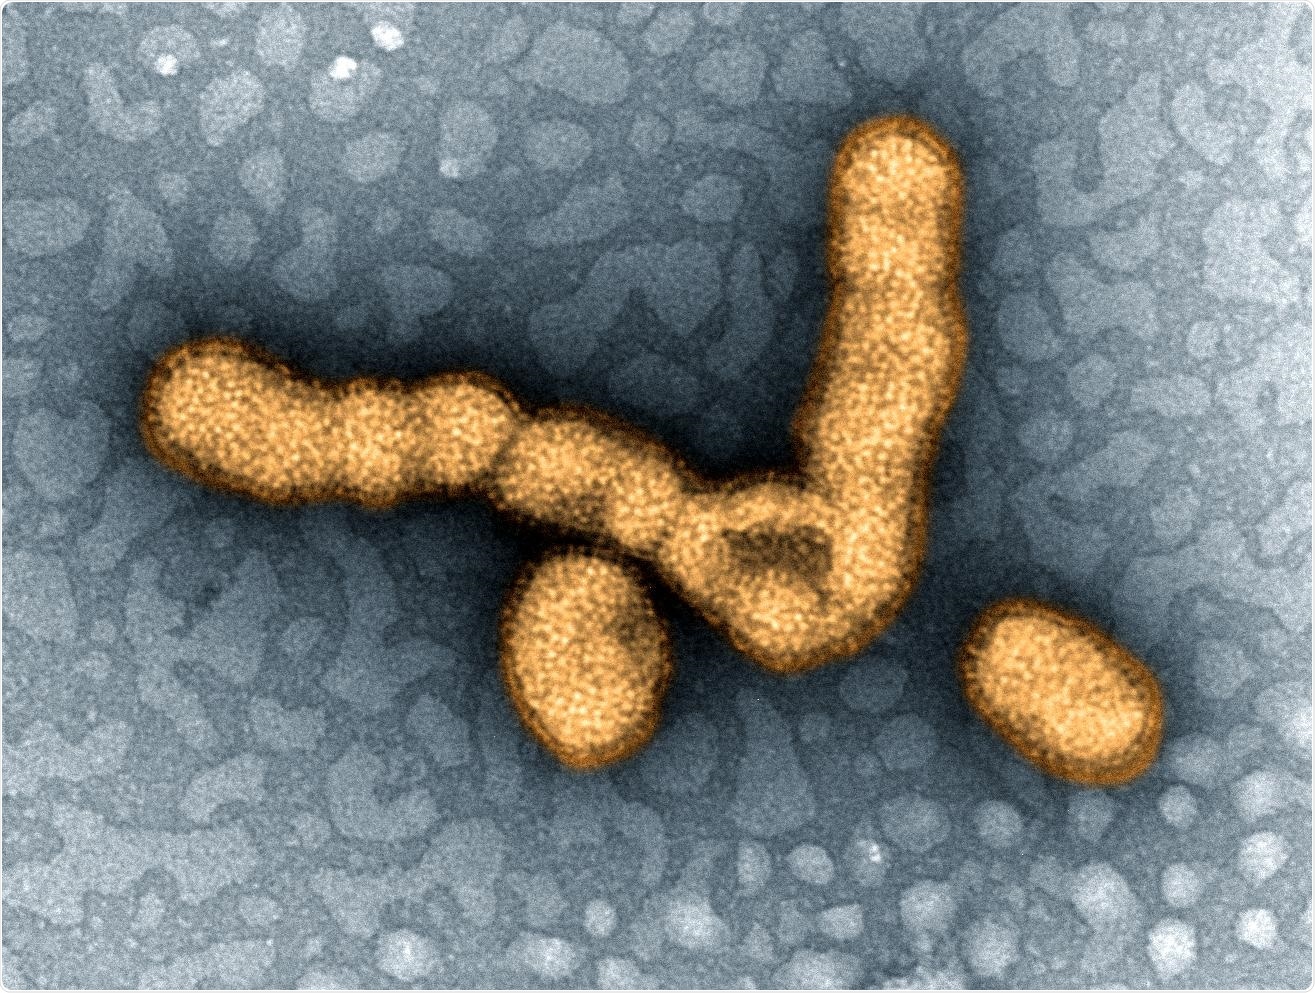 H1N1 Influenza Virus Particles Colorized transmission electron micrograph showing H1N1 influenza virus particles. Credit: NIAID